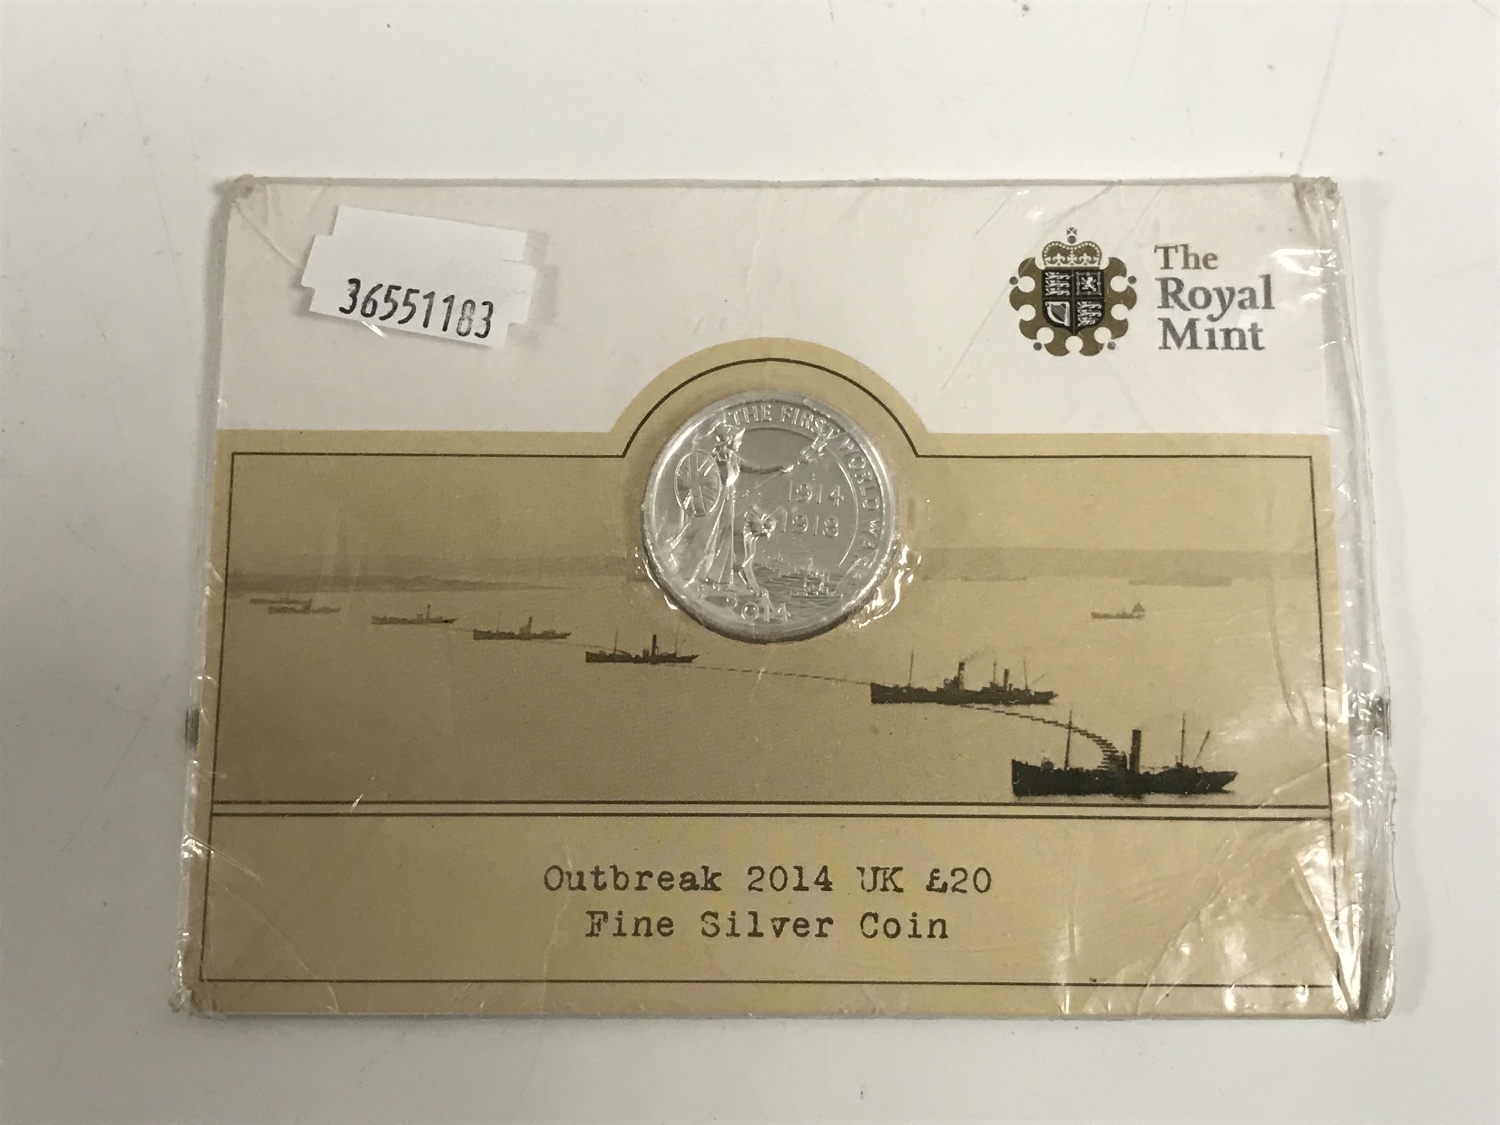 A Royal Mint issue Outbreak 2014 £20 fine silver coin